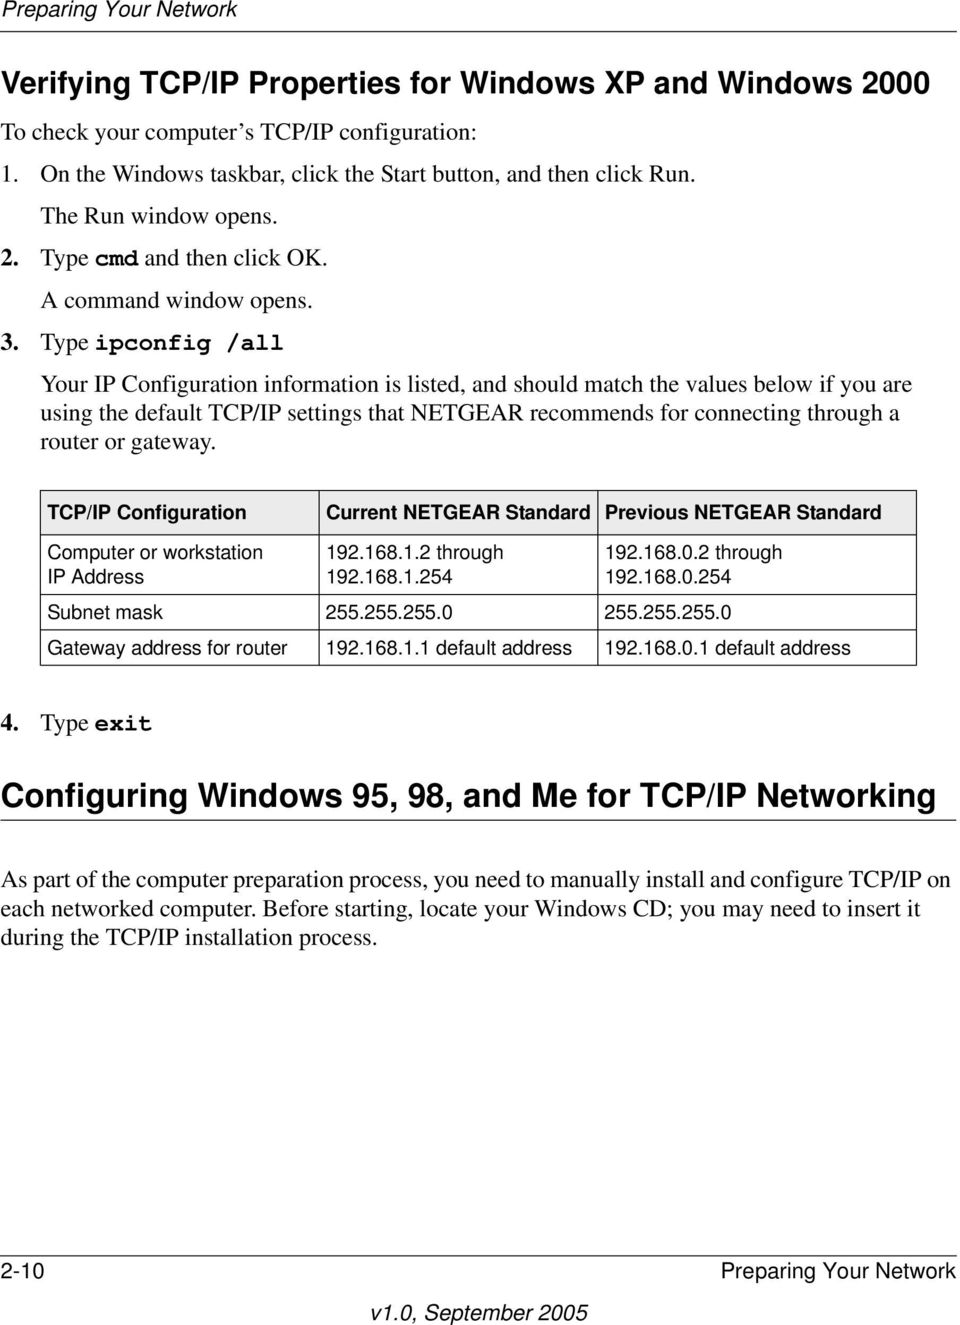 Type ipconfig /all Your IP Configuration information is listed, and should match the values below if you are using the default TCP/IP settings that NETGEAR recommends for connecting through a router